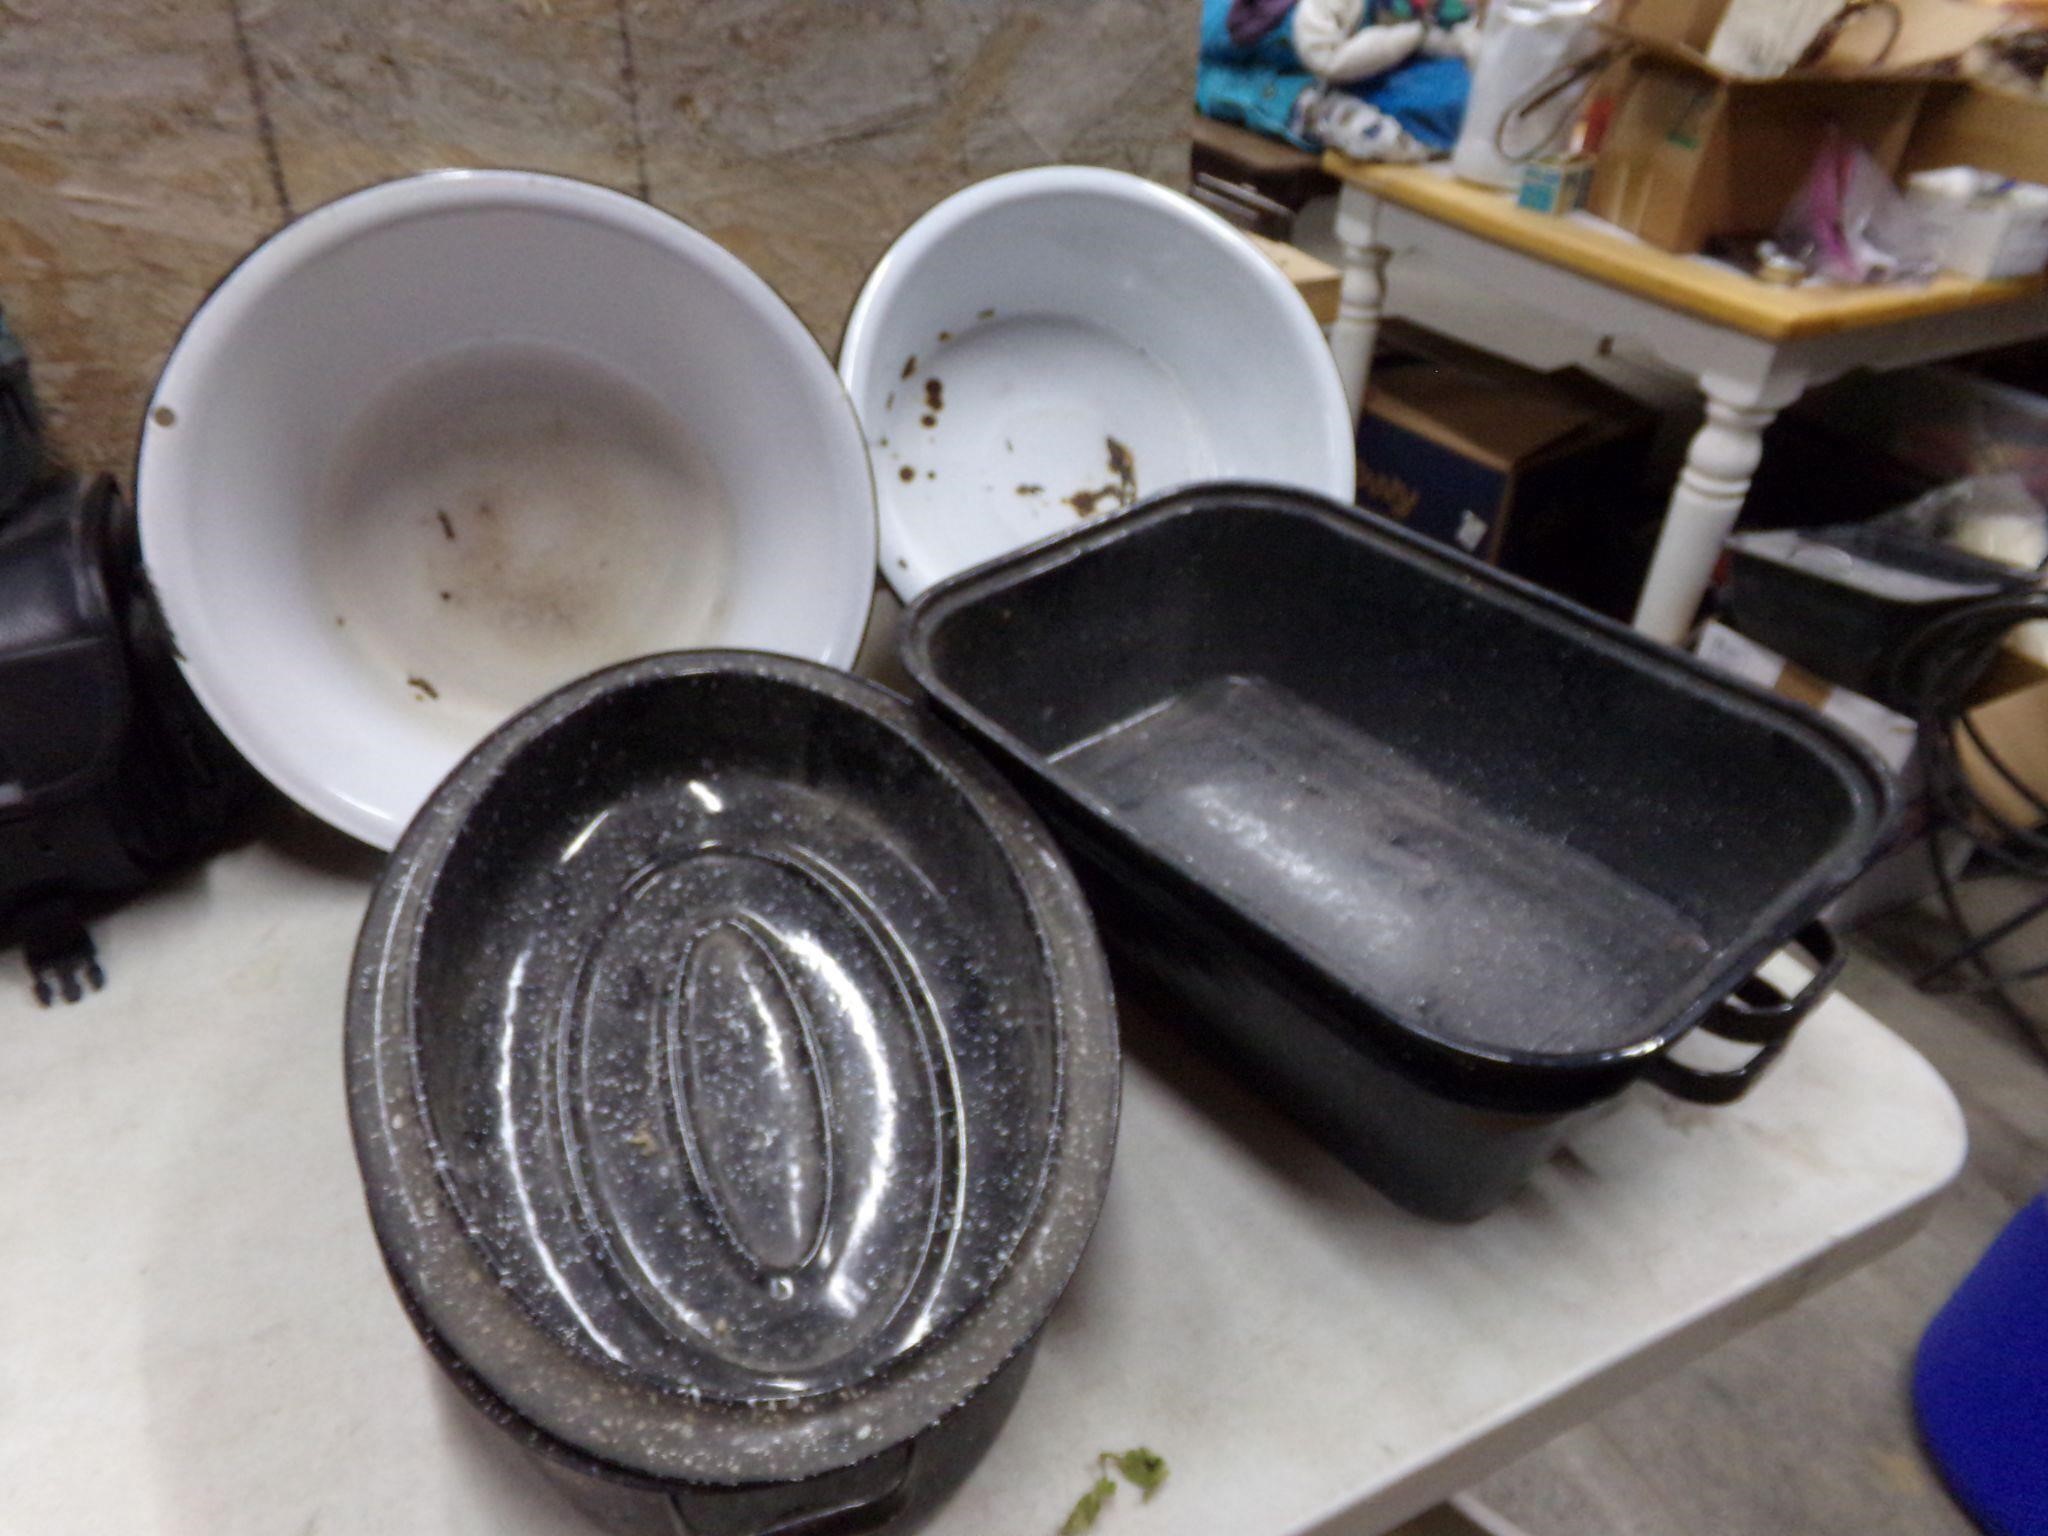 2 enamel bowls and 2 roasters